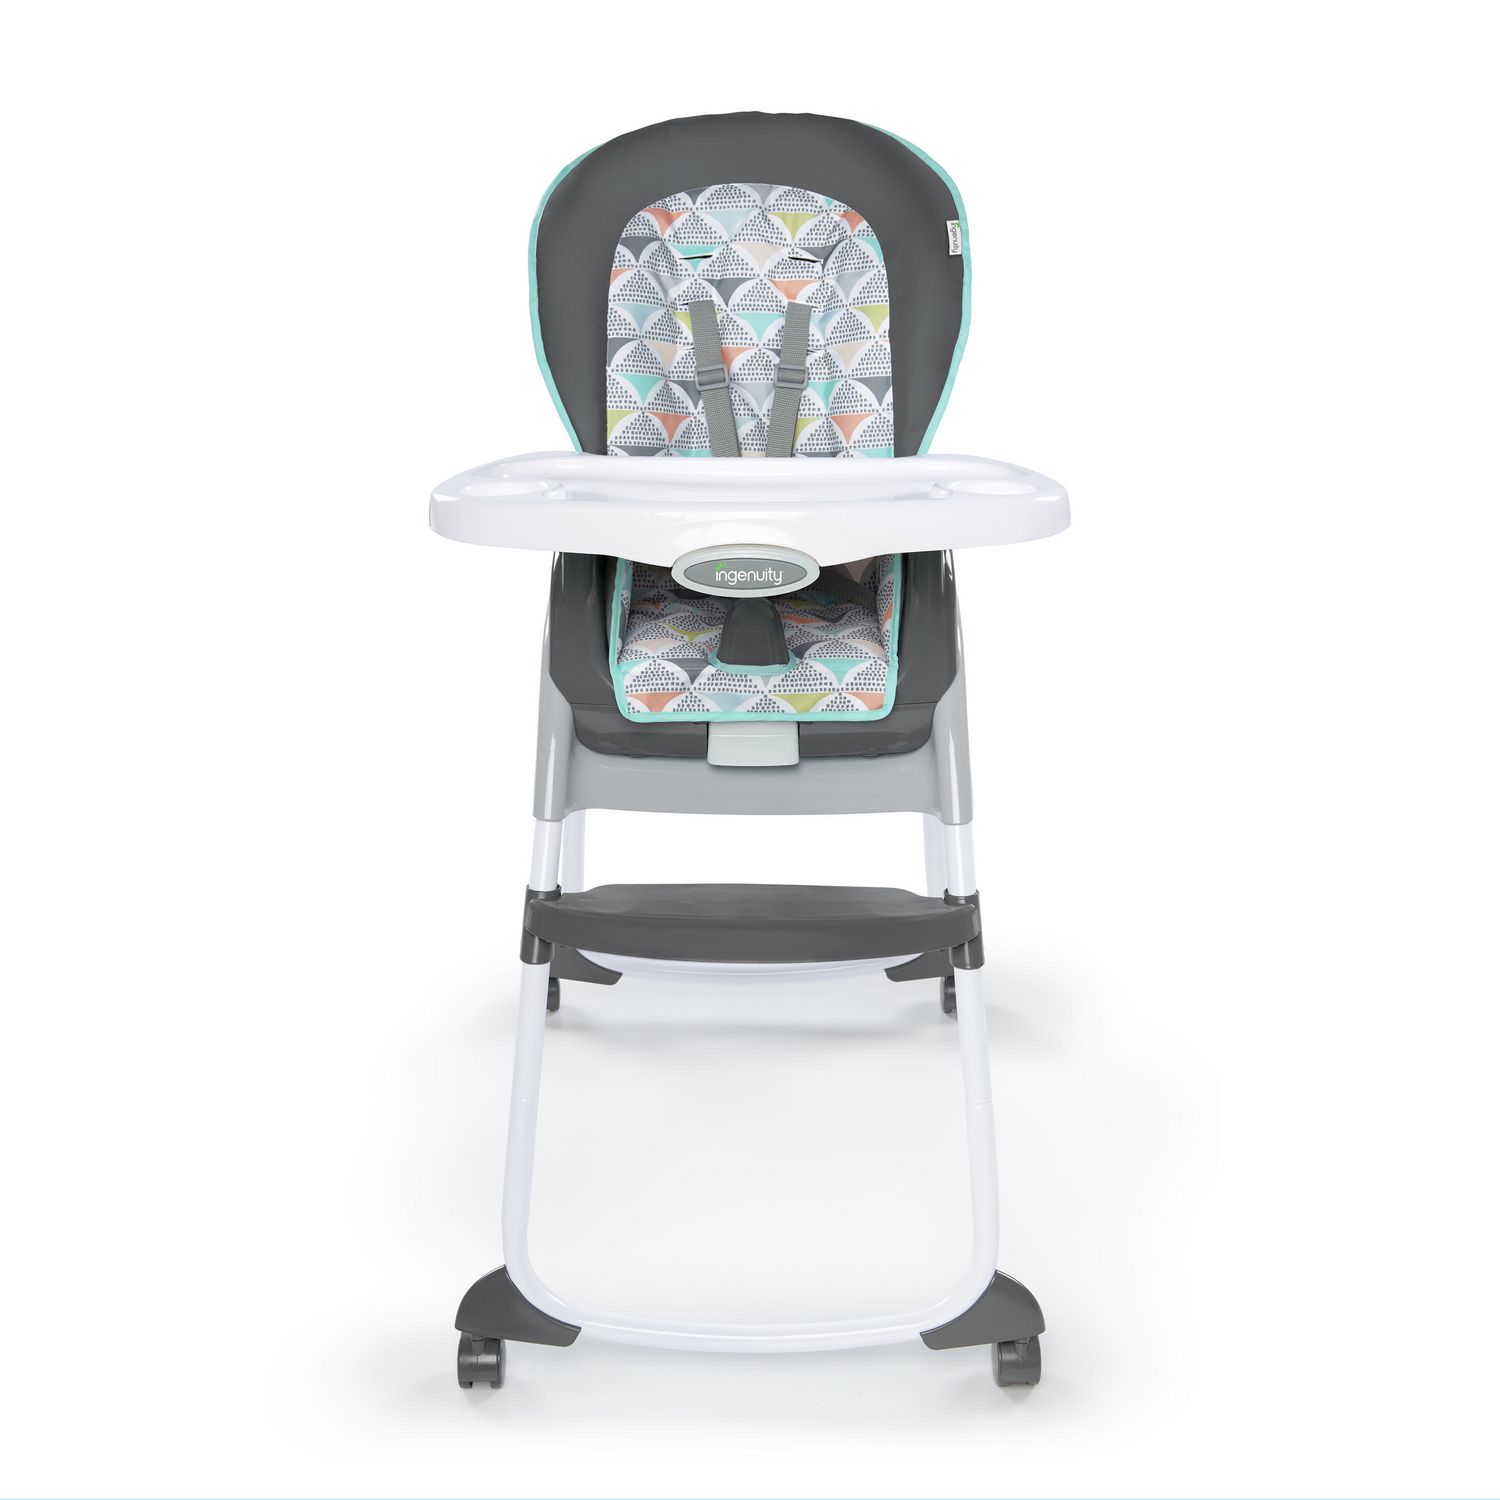 smyths baby changing unit